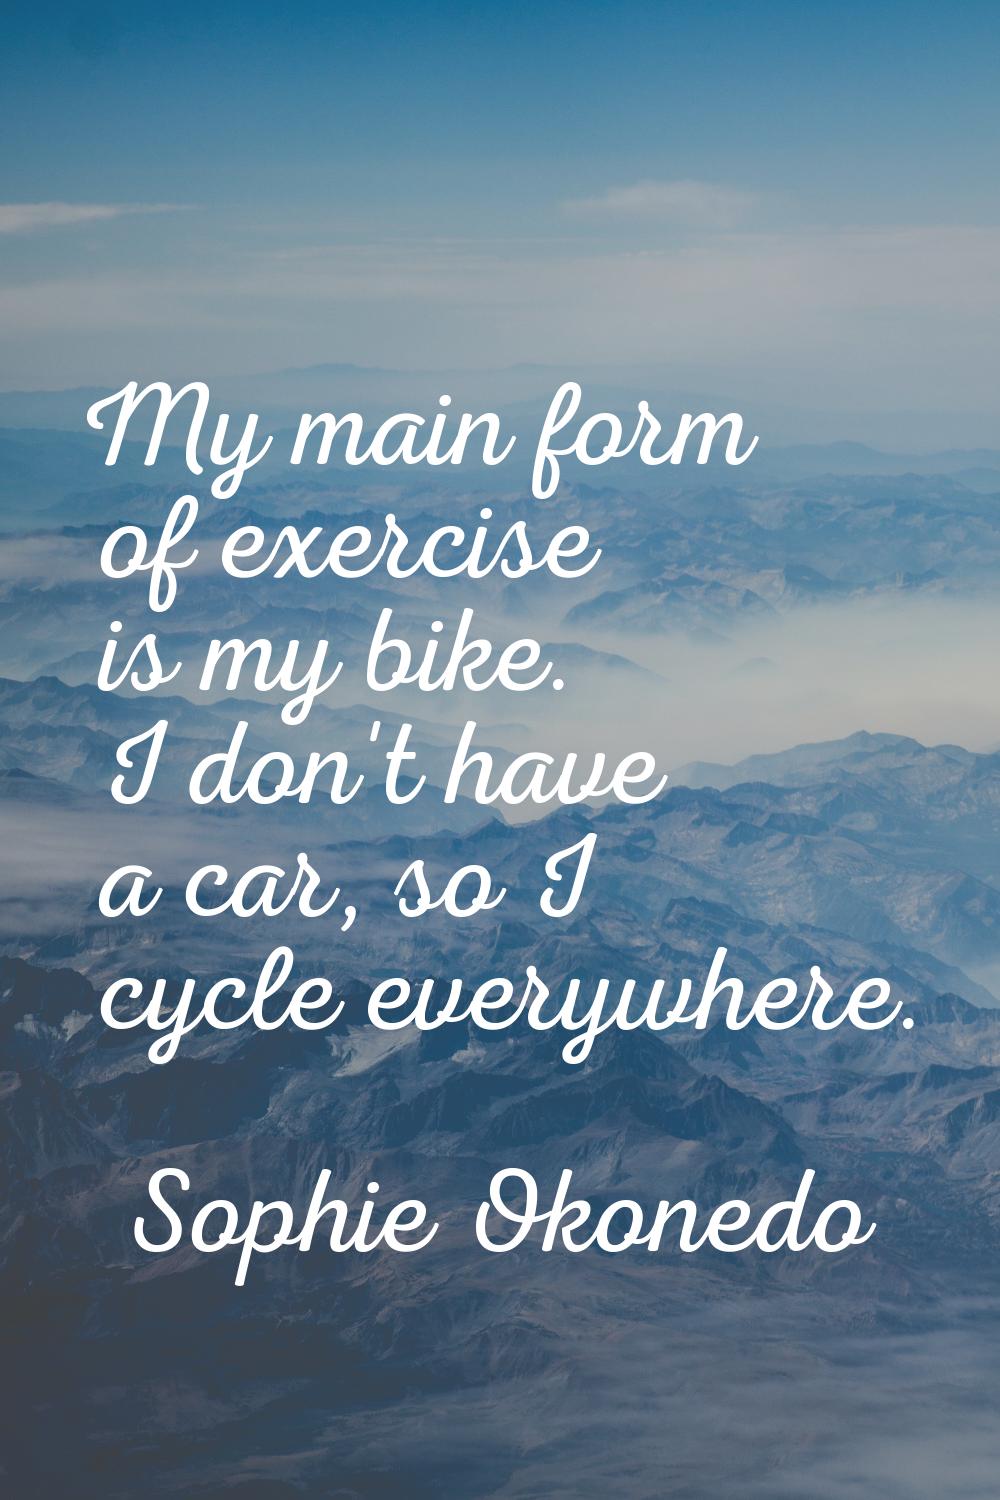 My main form of exercise is my bike. I don't have a car, so I cycle everywhere.